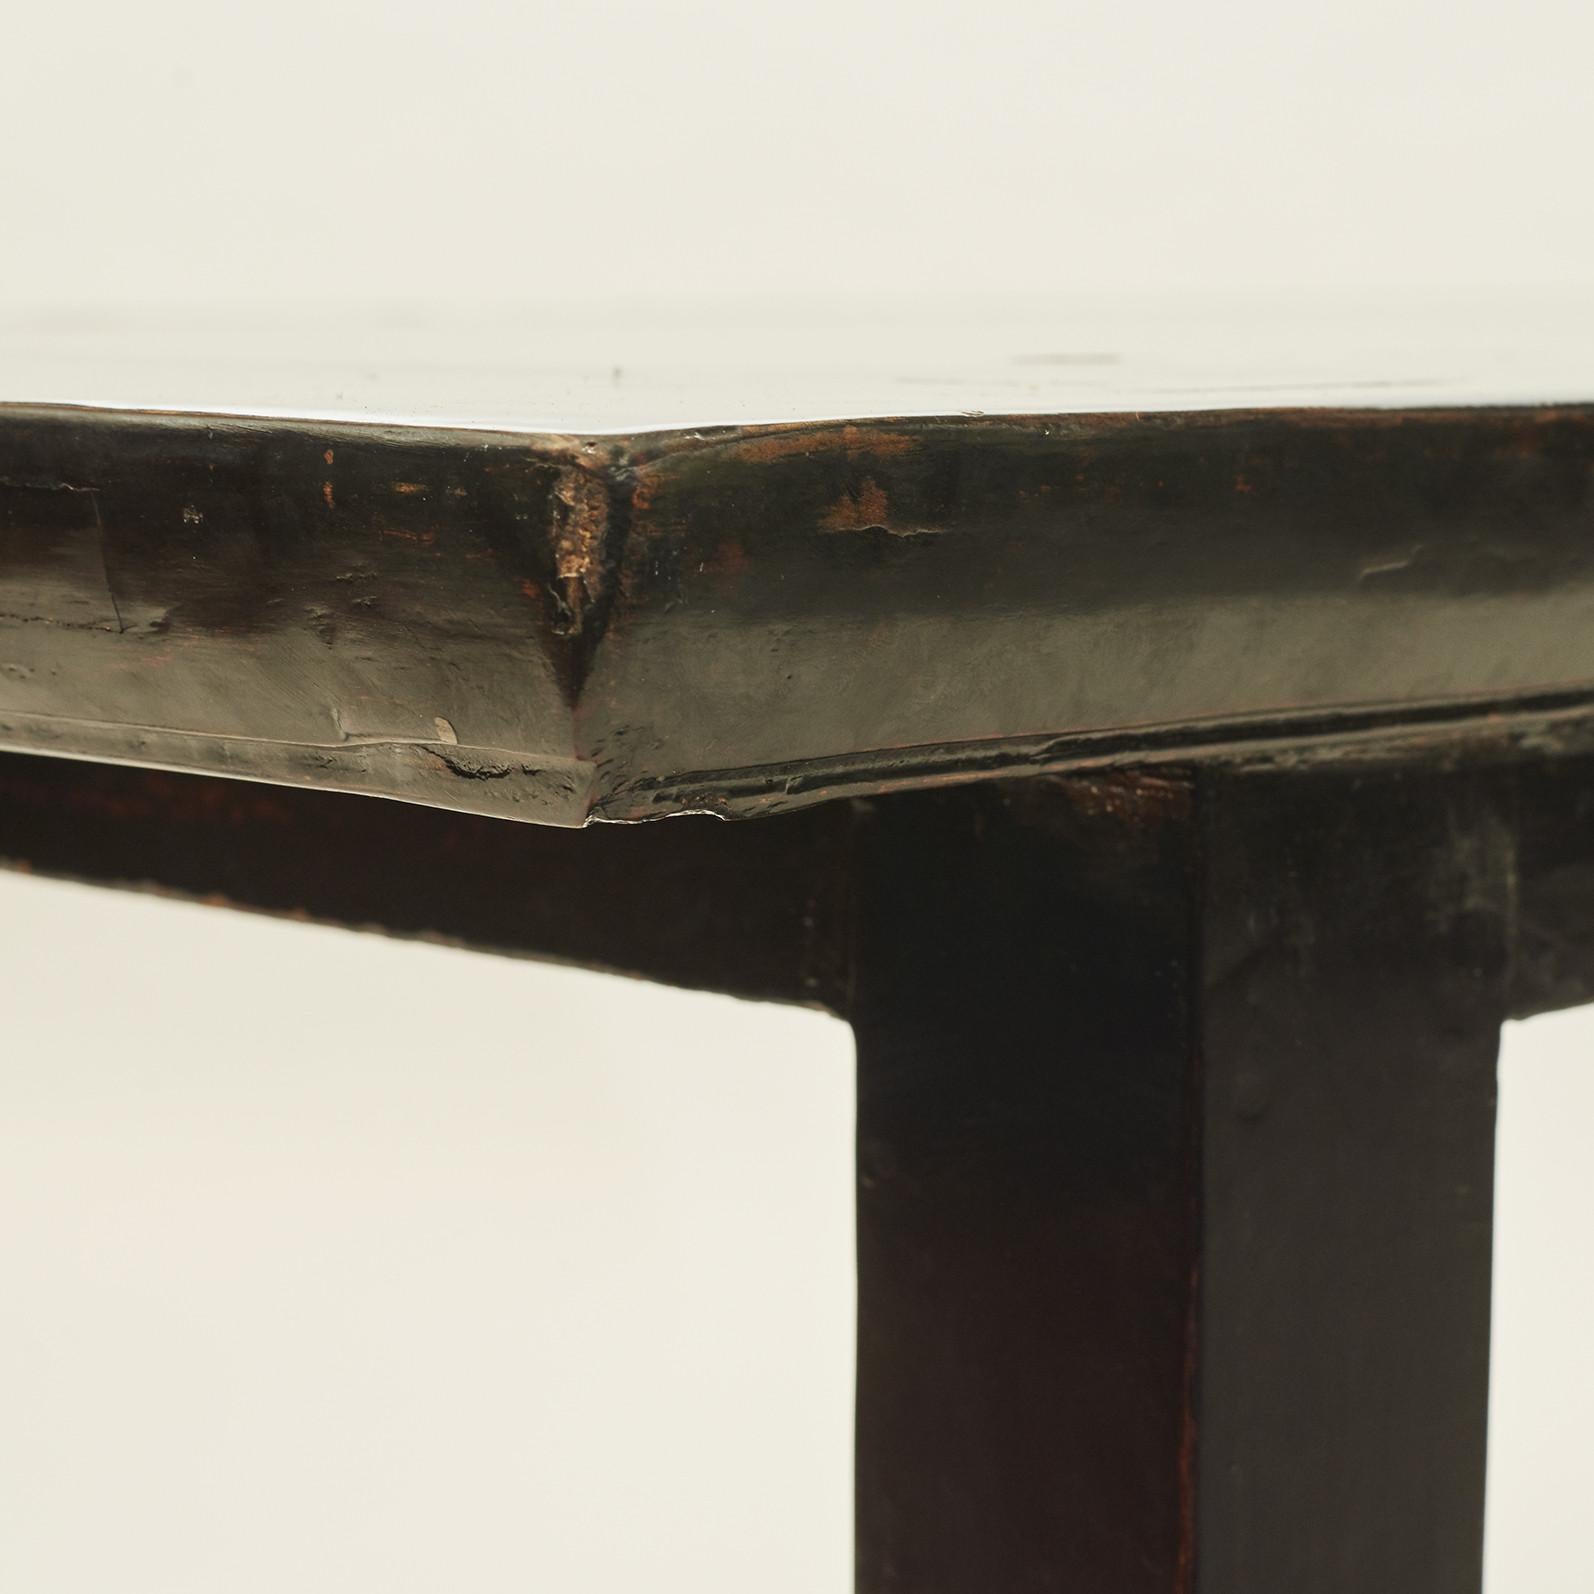 Chinese 19th Century Dining Table / Calligraphy Table 'Work Table' from China